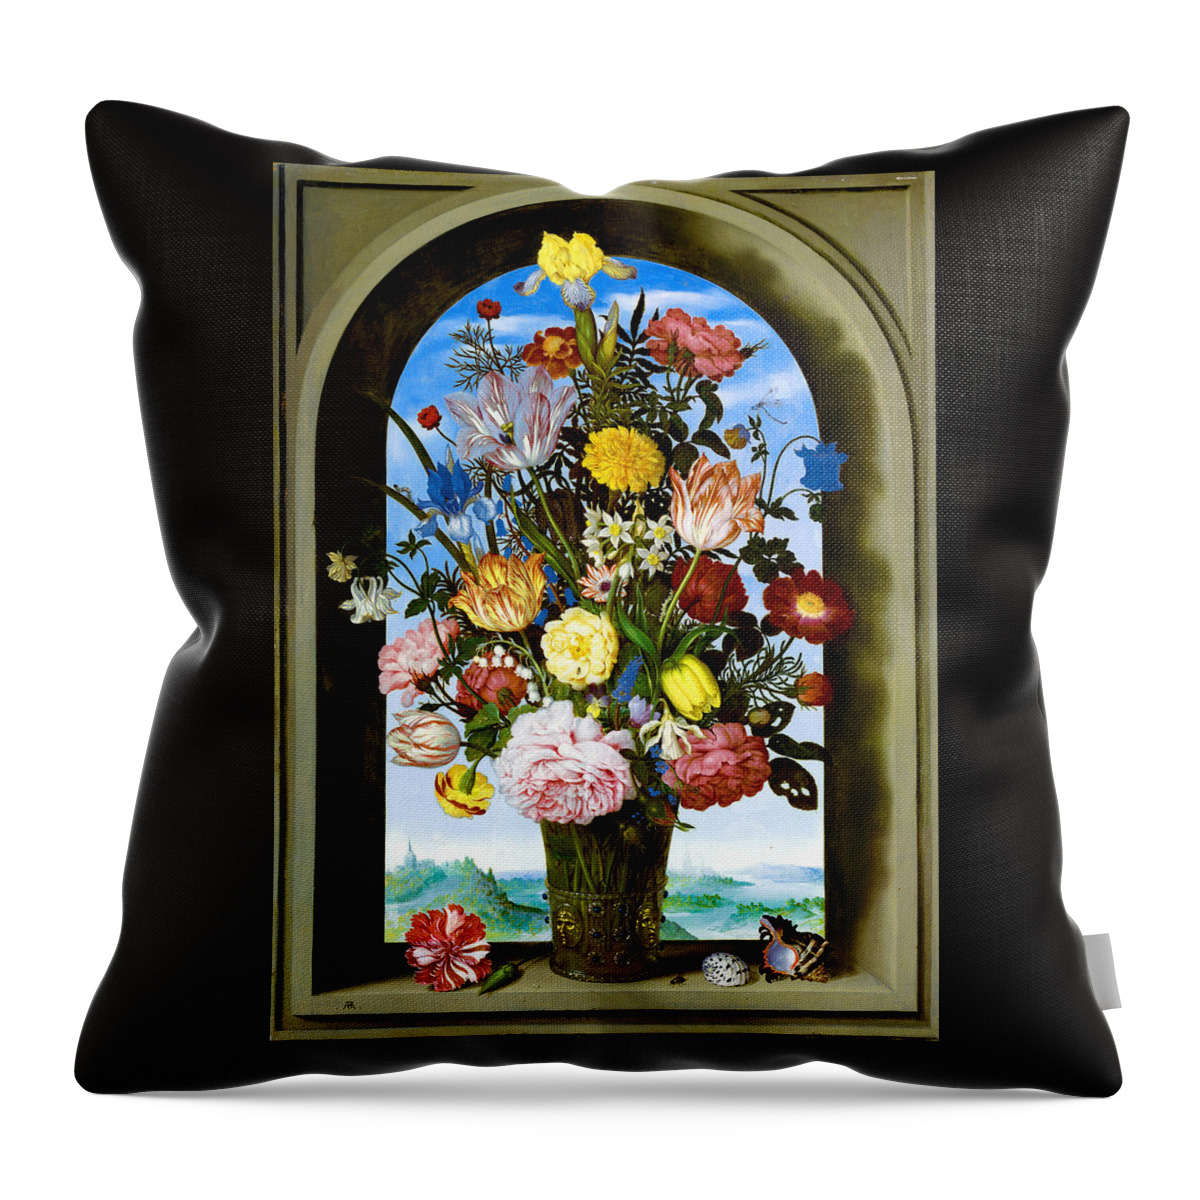 Ambrosius Brosschaert The Elder Throw Pillow featuring the painting Vase of Flowers in a Window by Ambrosius Brosschaert the Elder